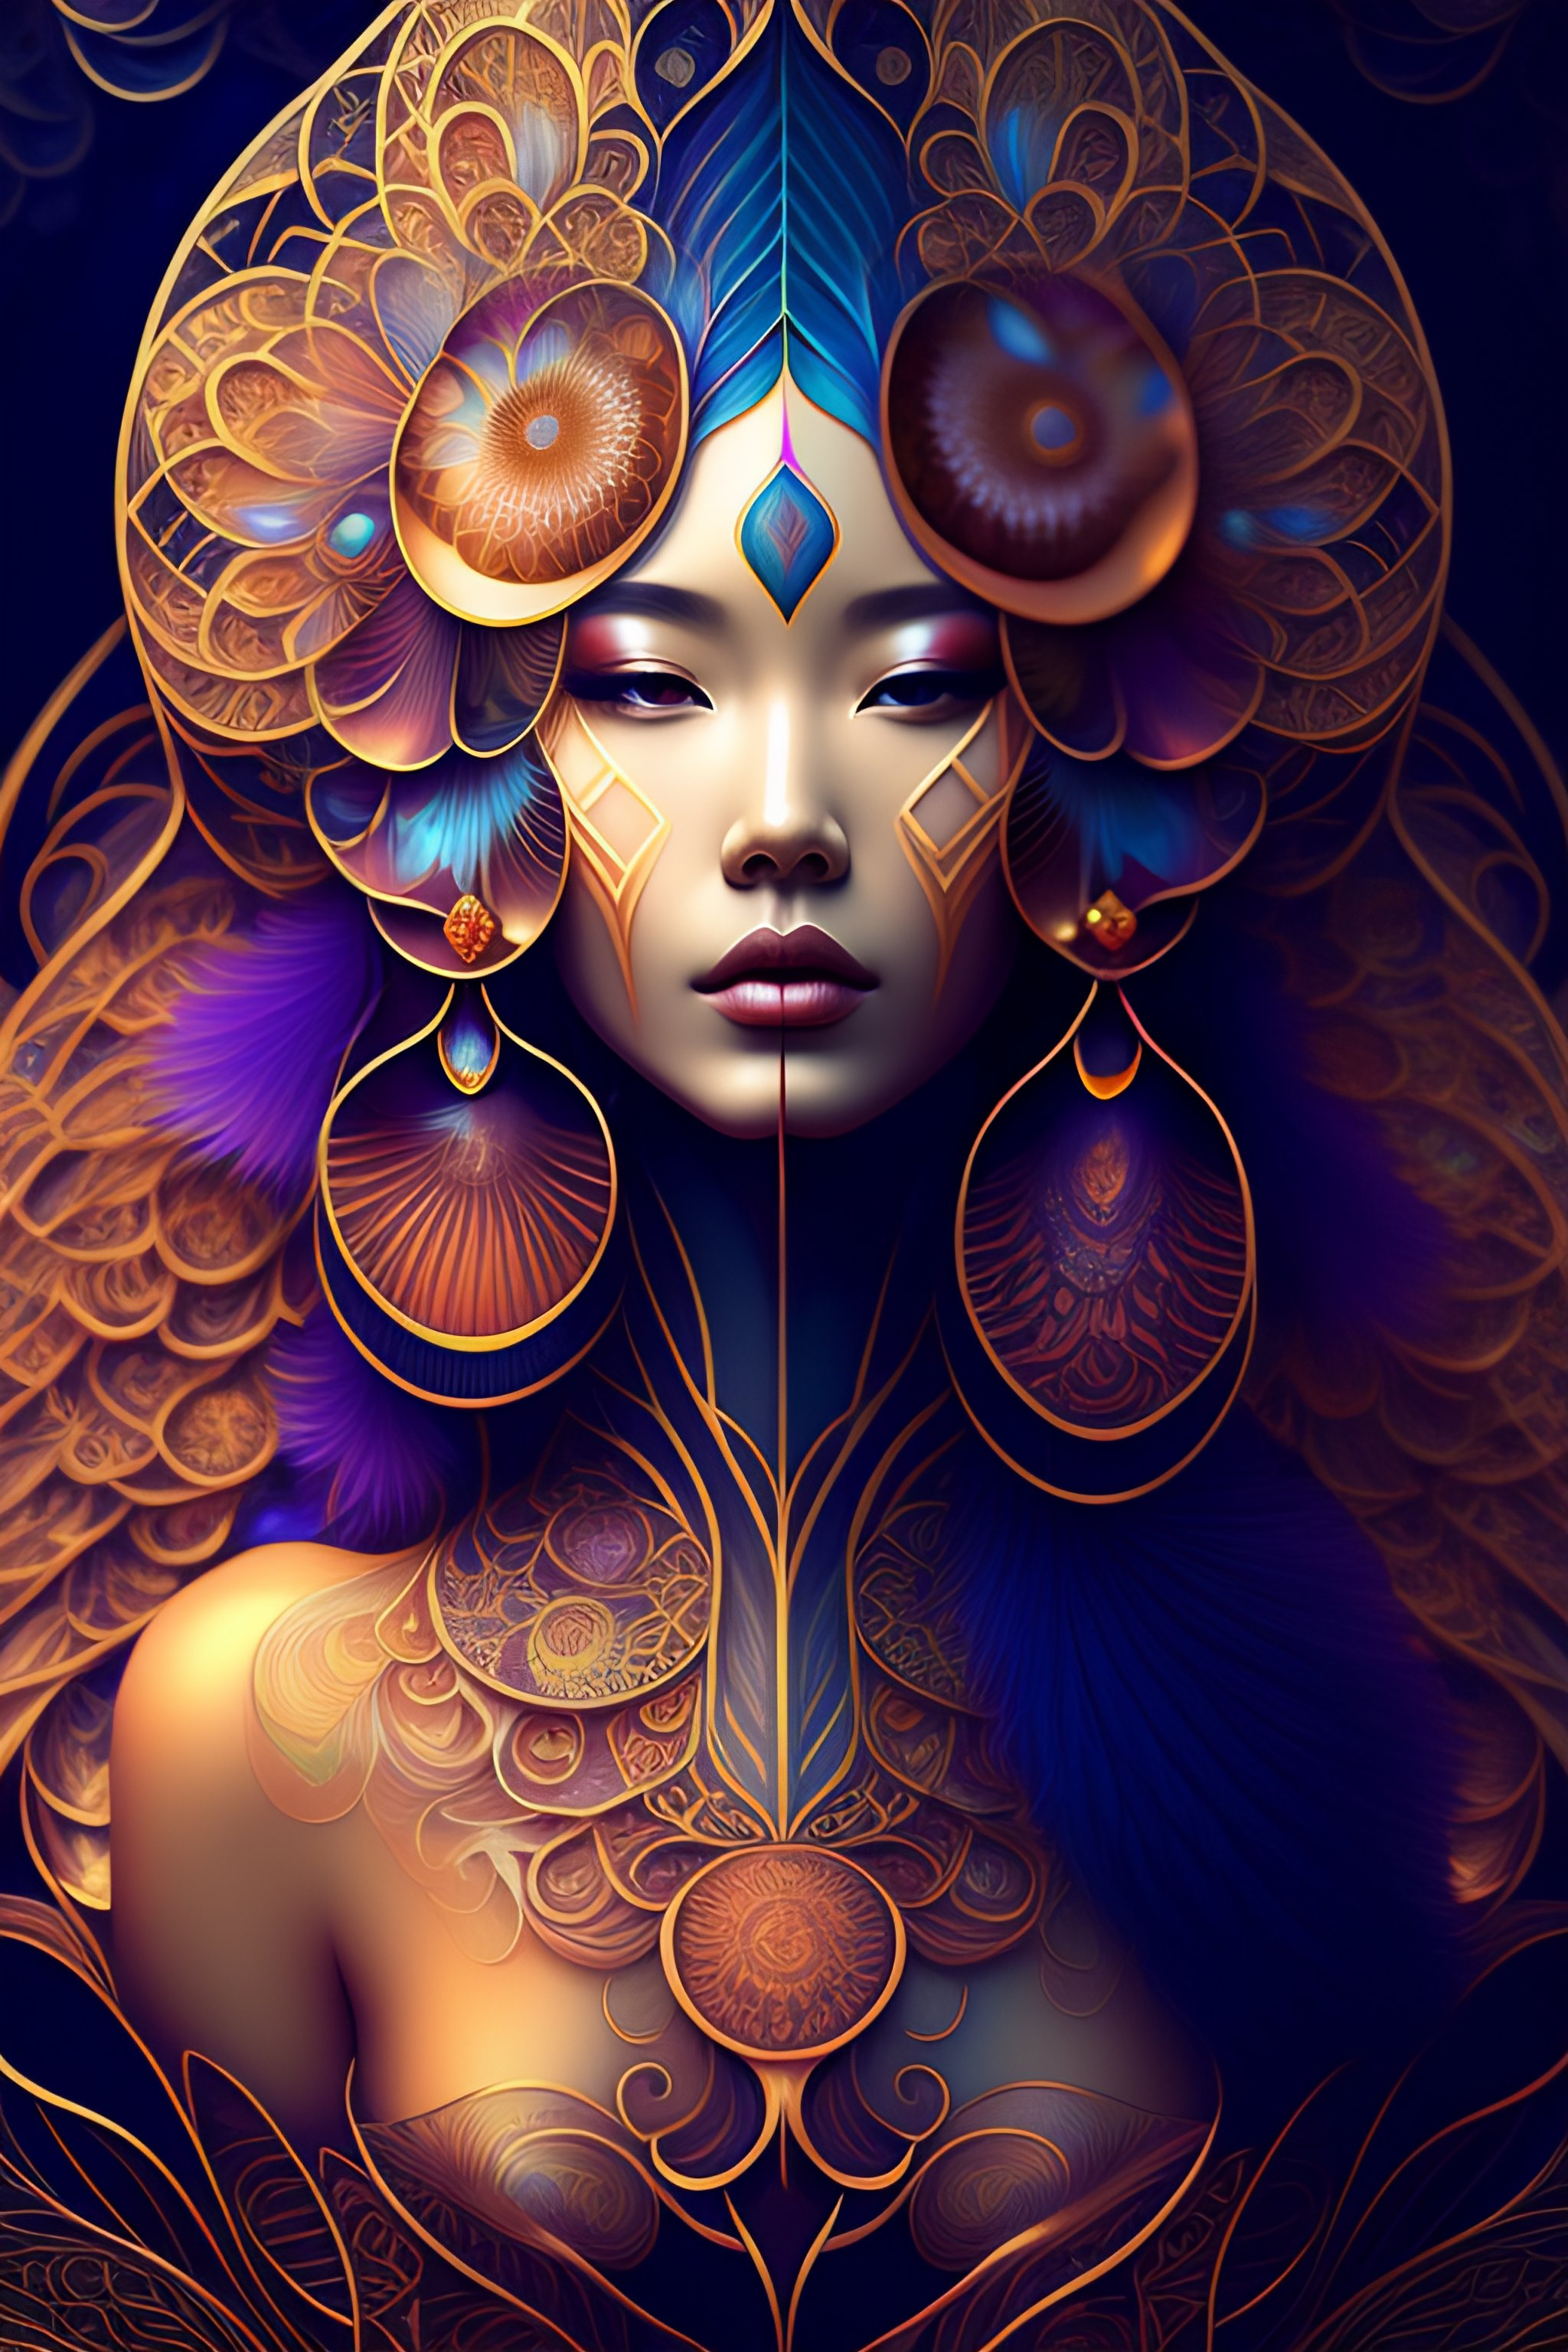 Lexica - Human flower by Android Jones, Earnst Haeckel, James Jean ...